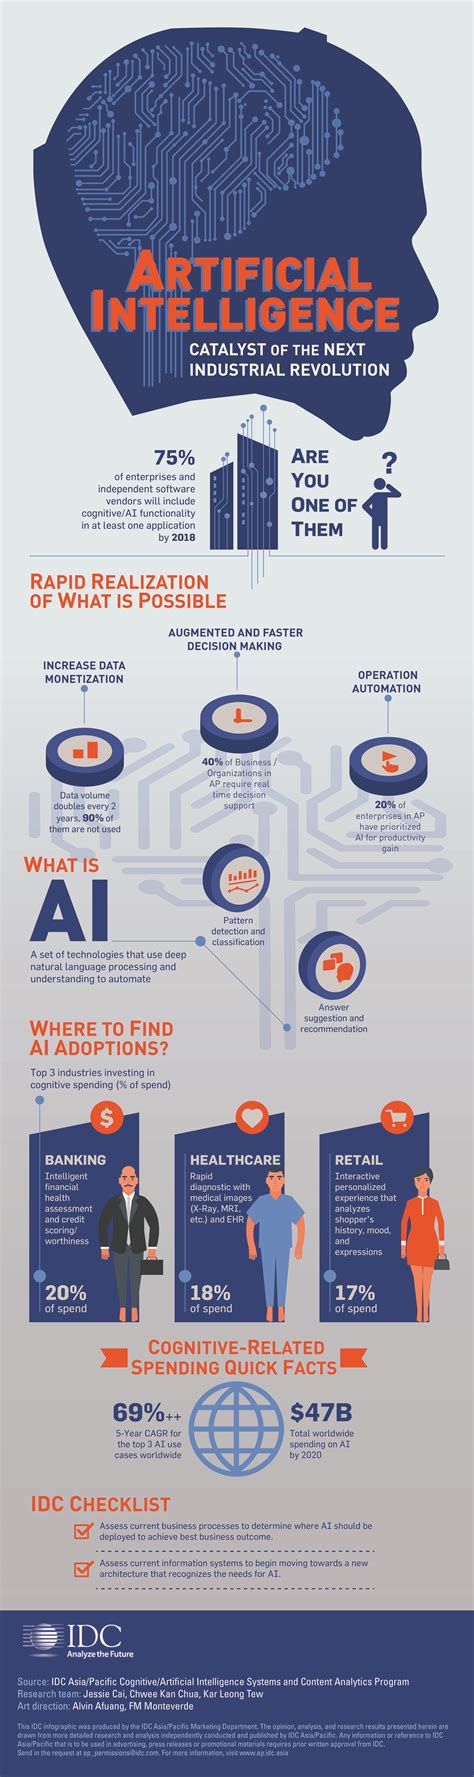 Idc Published A New Infographic Artificial Intelligence Catalyst Of The N Artificial